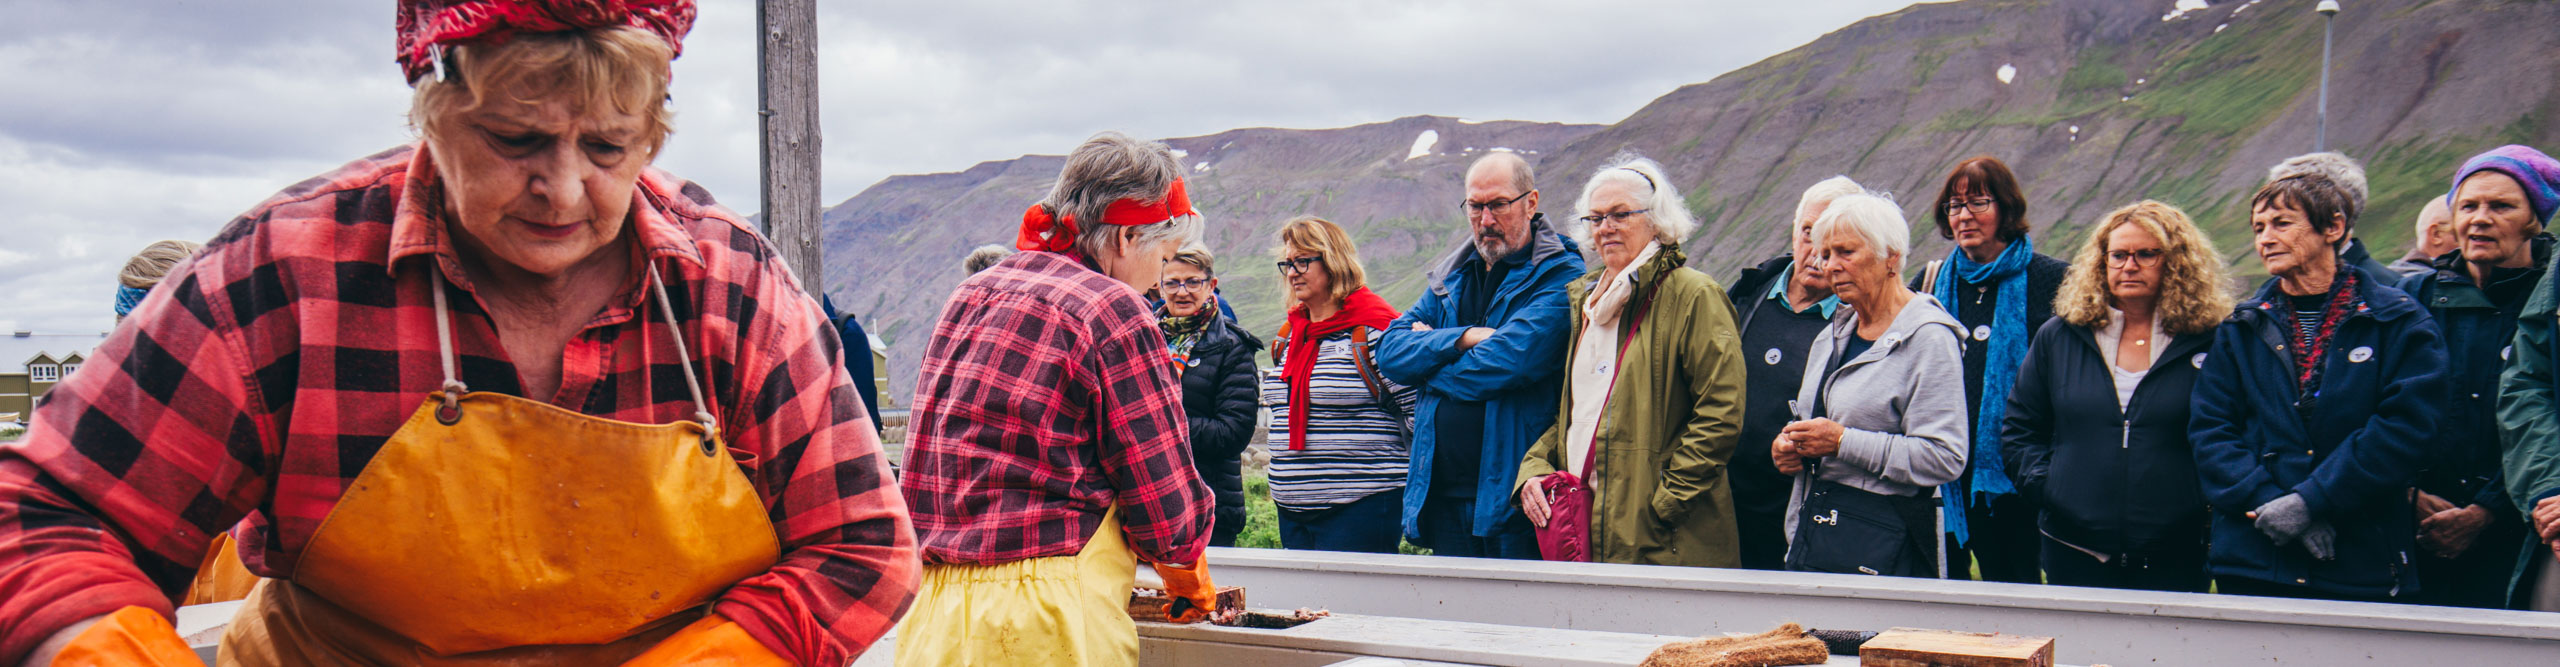 Group lining up to get food at an outdoor venue, Iceland 